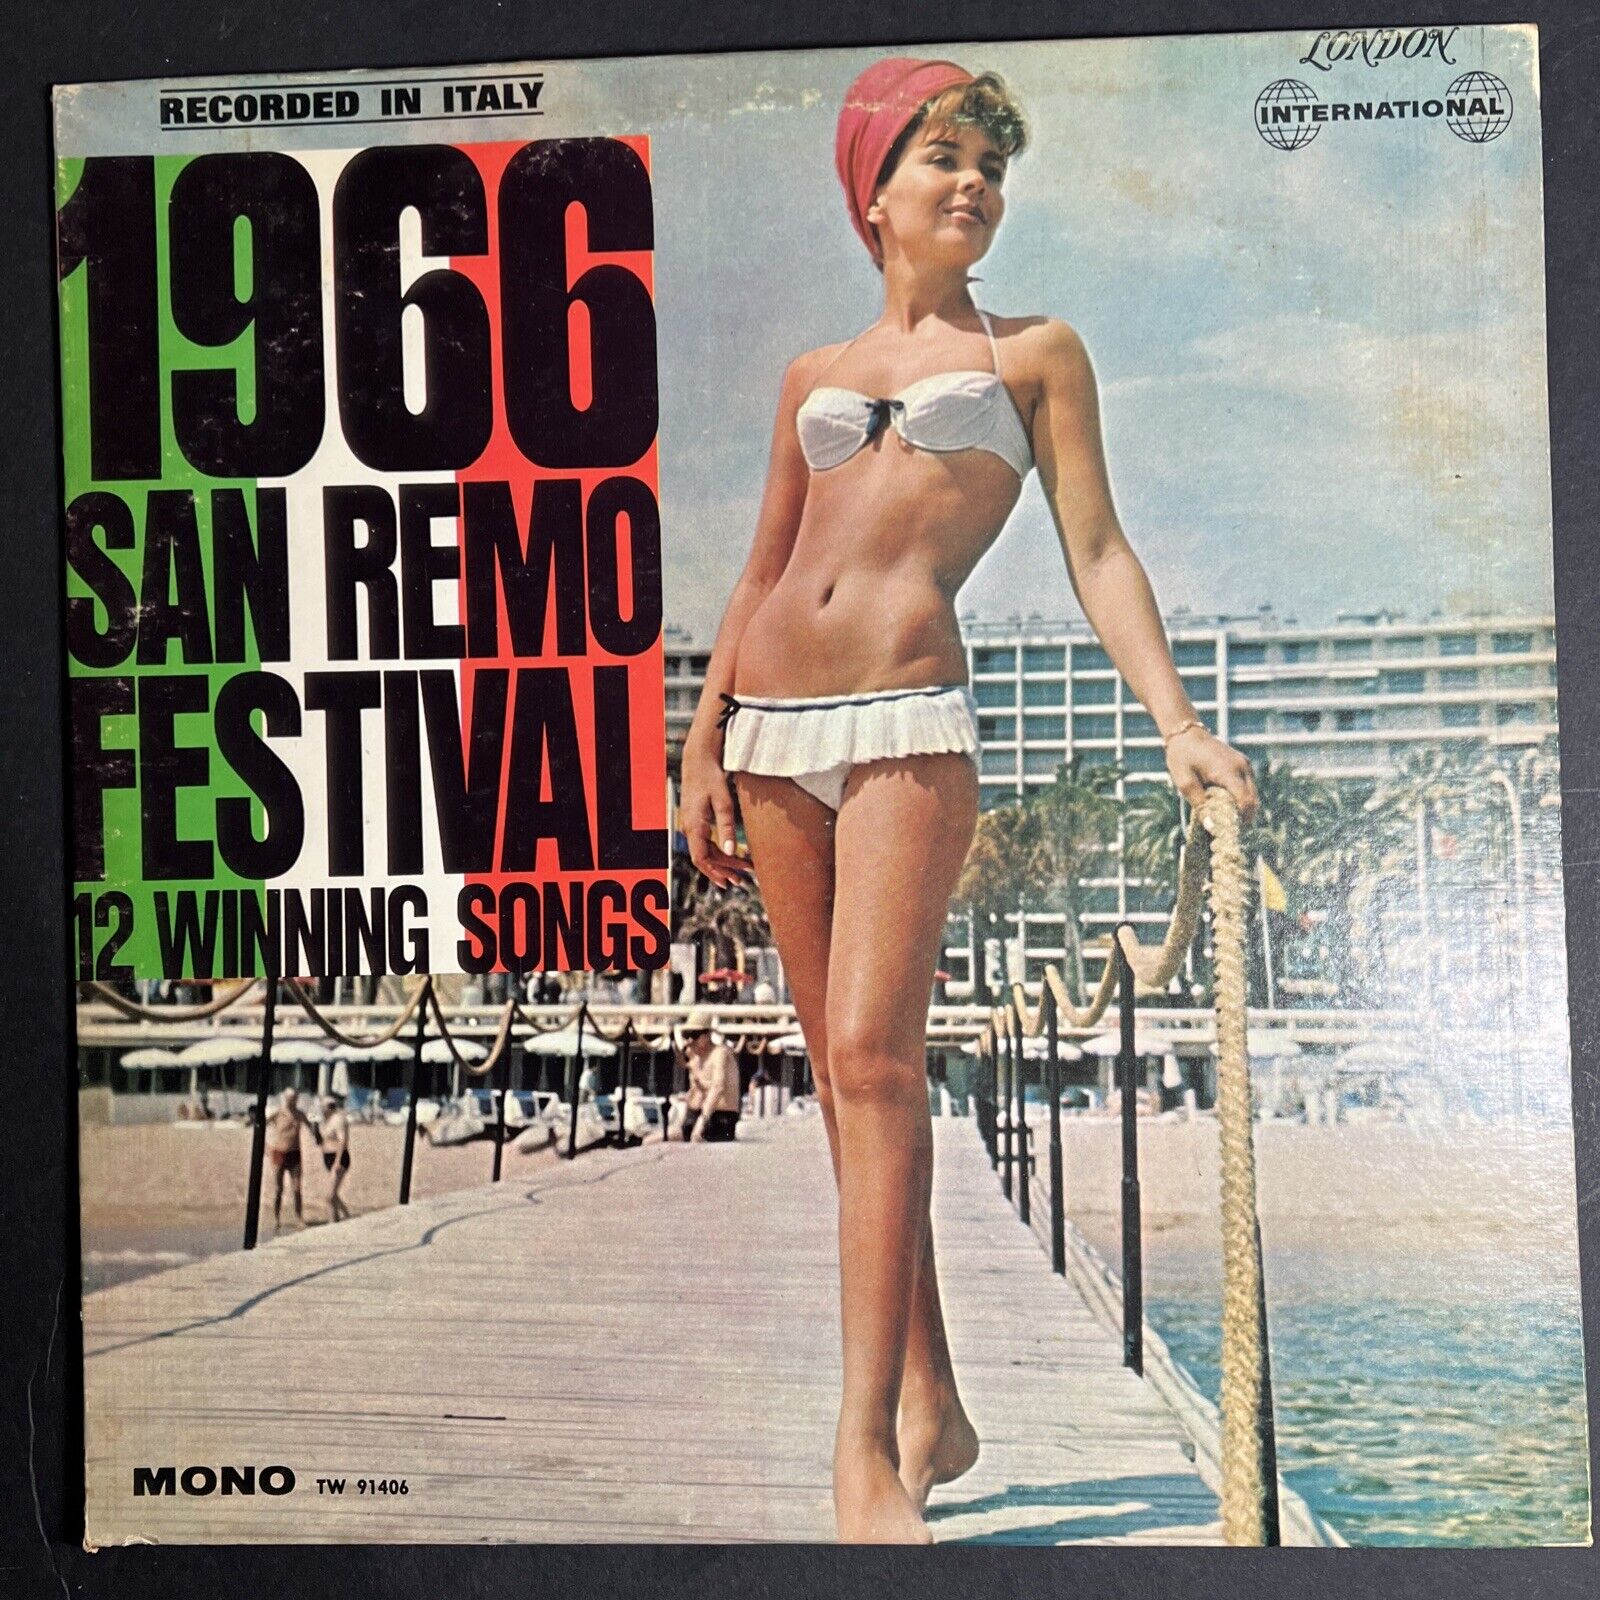 1966 San Remo Festival In Italy -12 Hit Songs Cheesecake Vinyl Record LP